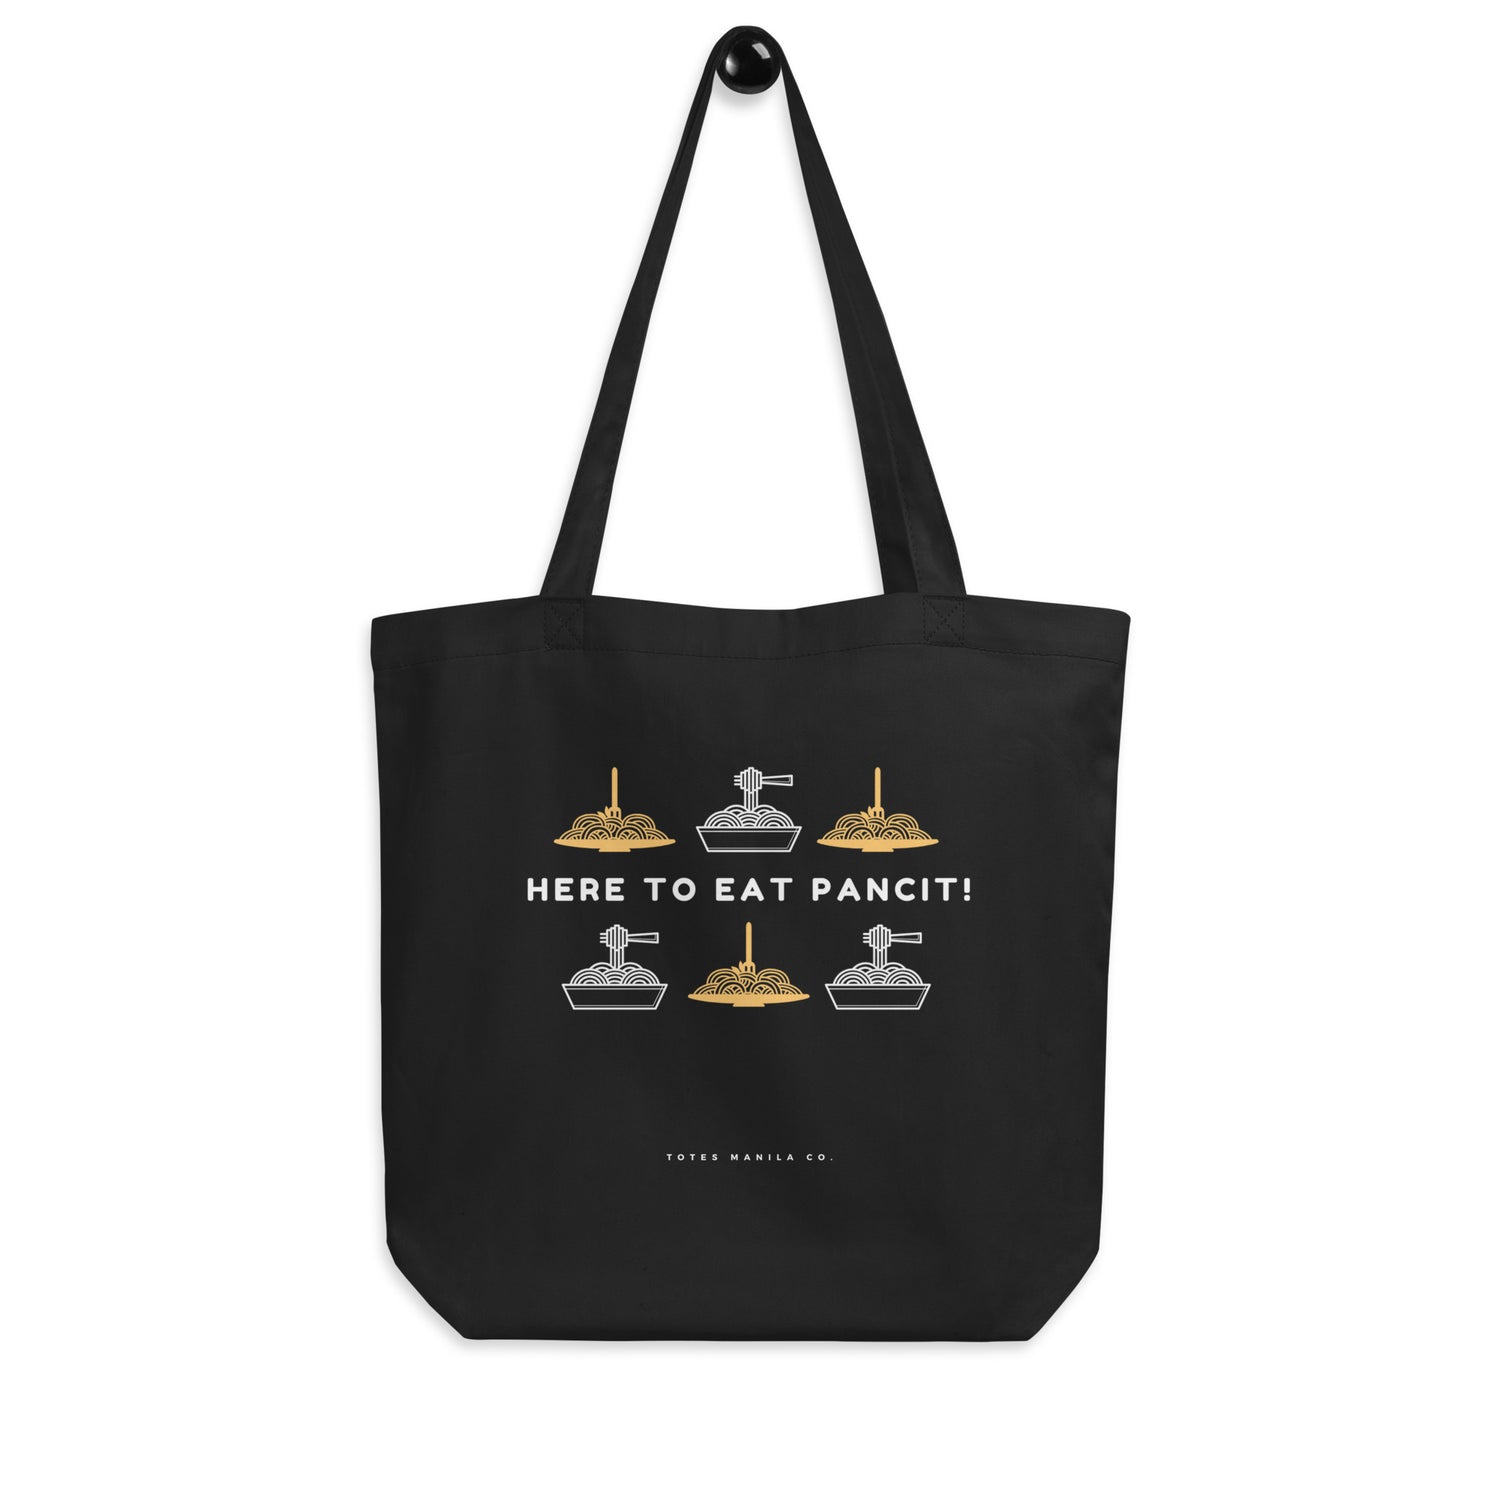 Here To Eat Pancit! Filipino Food Statement Eco Tote Bag in color Black.